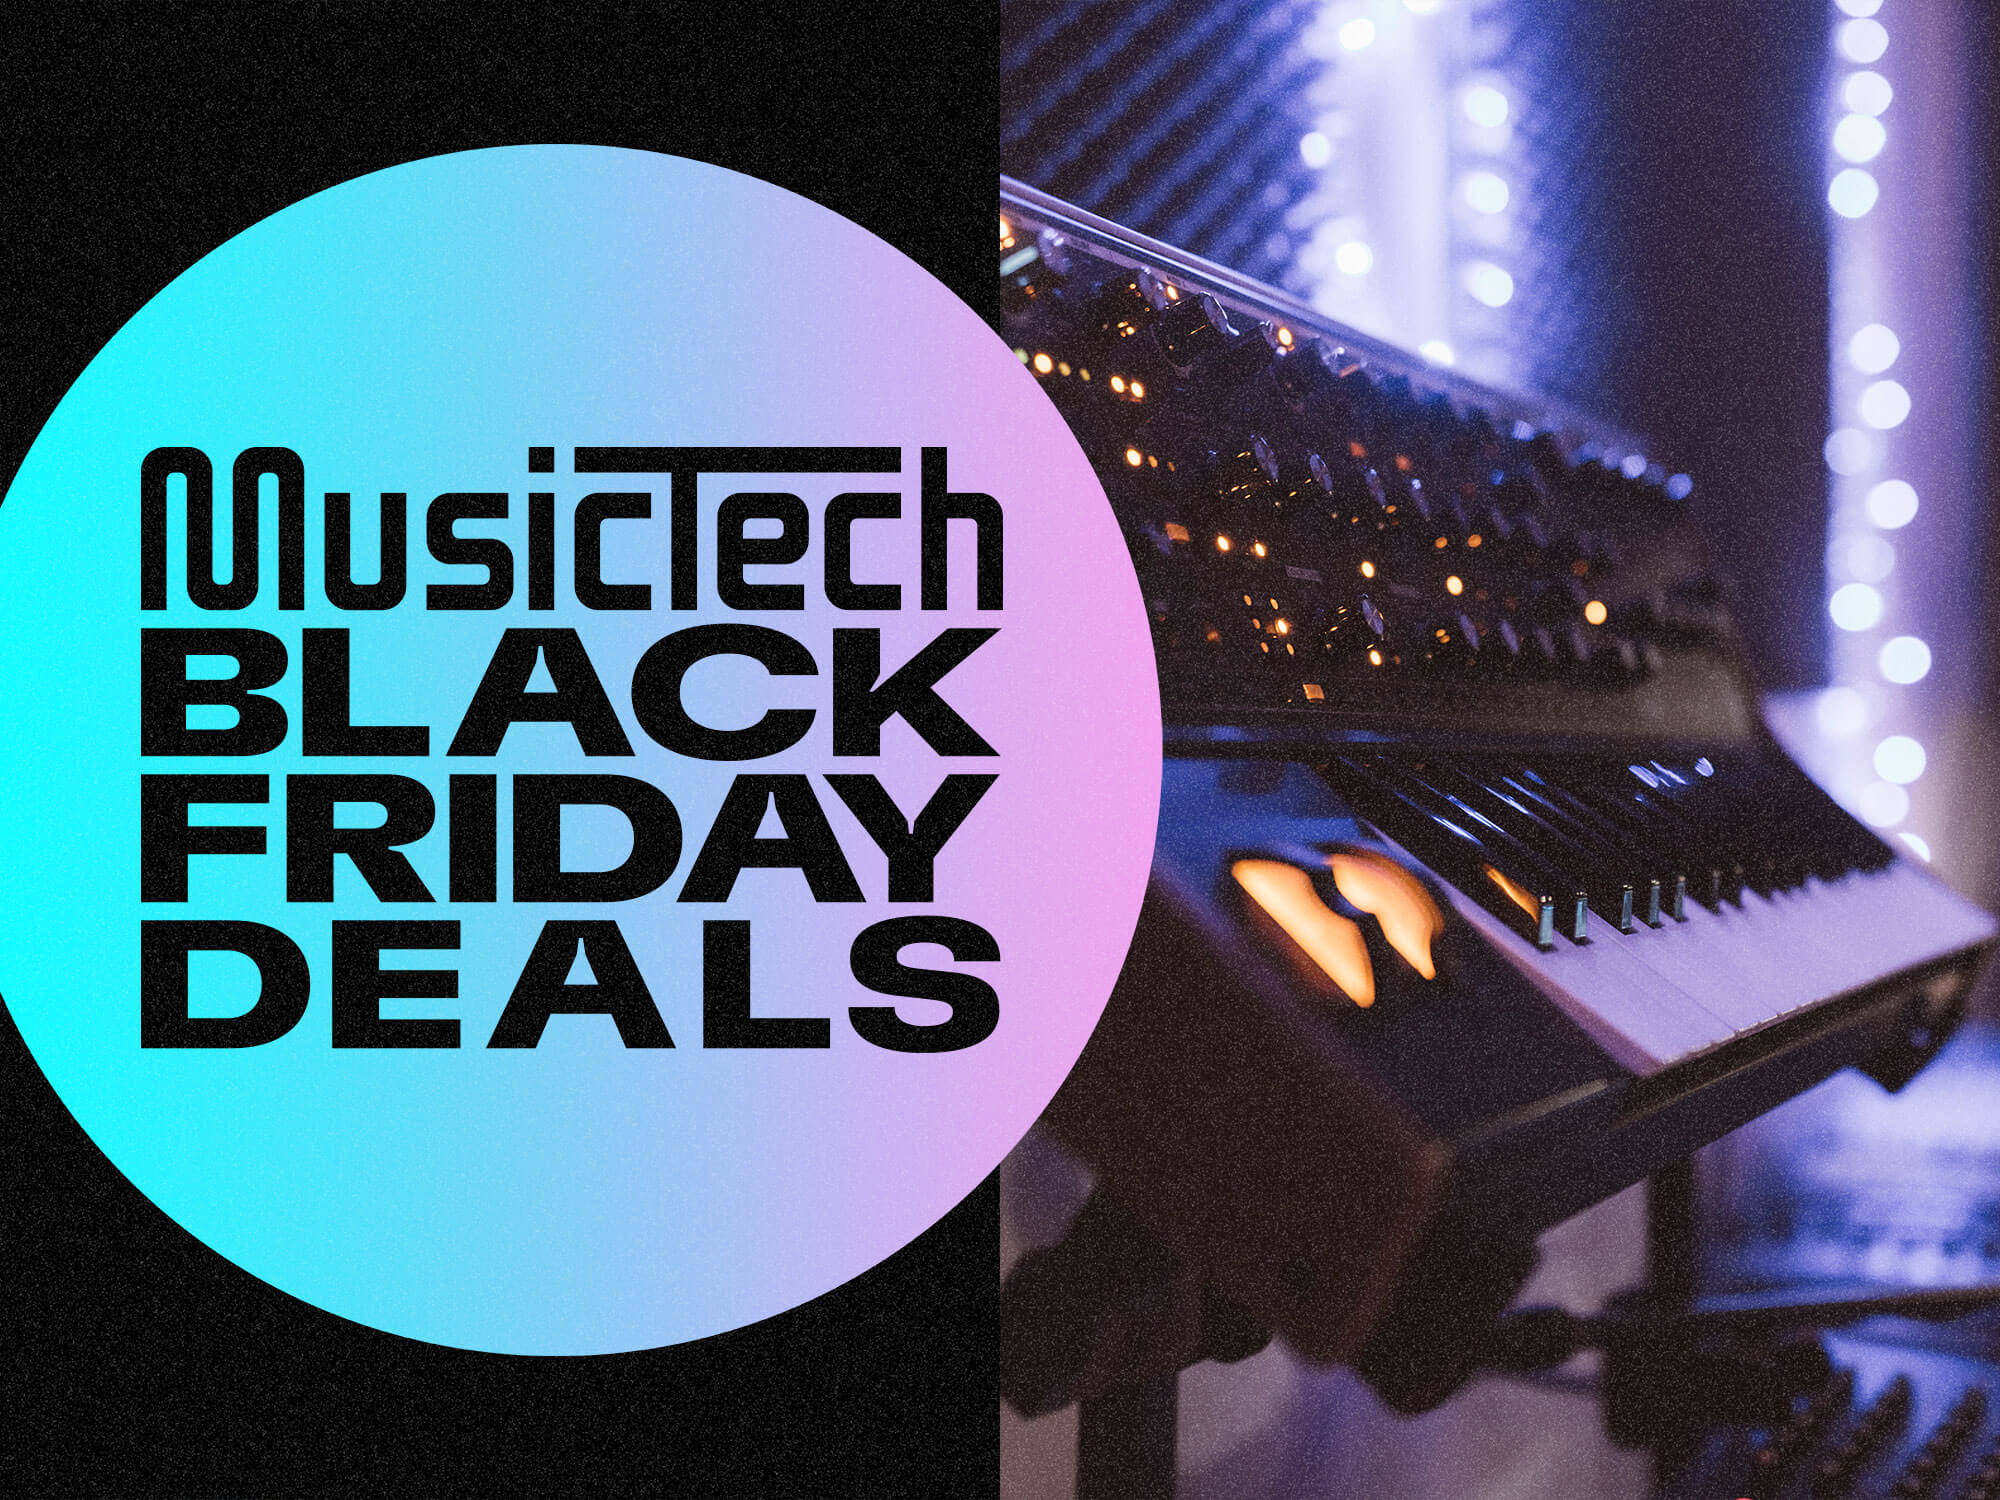 Black Friday and synth